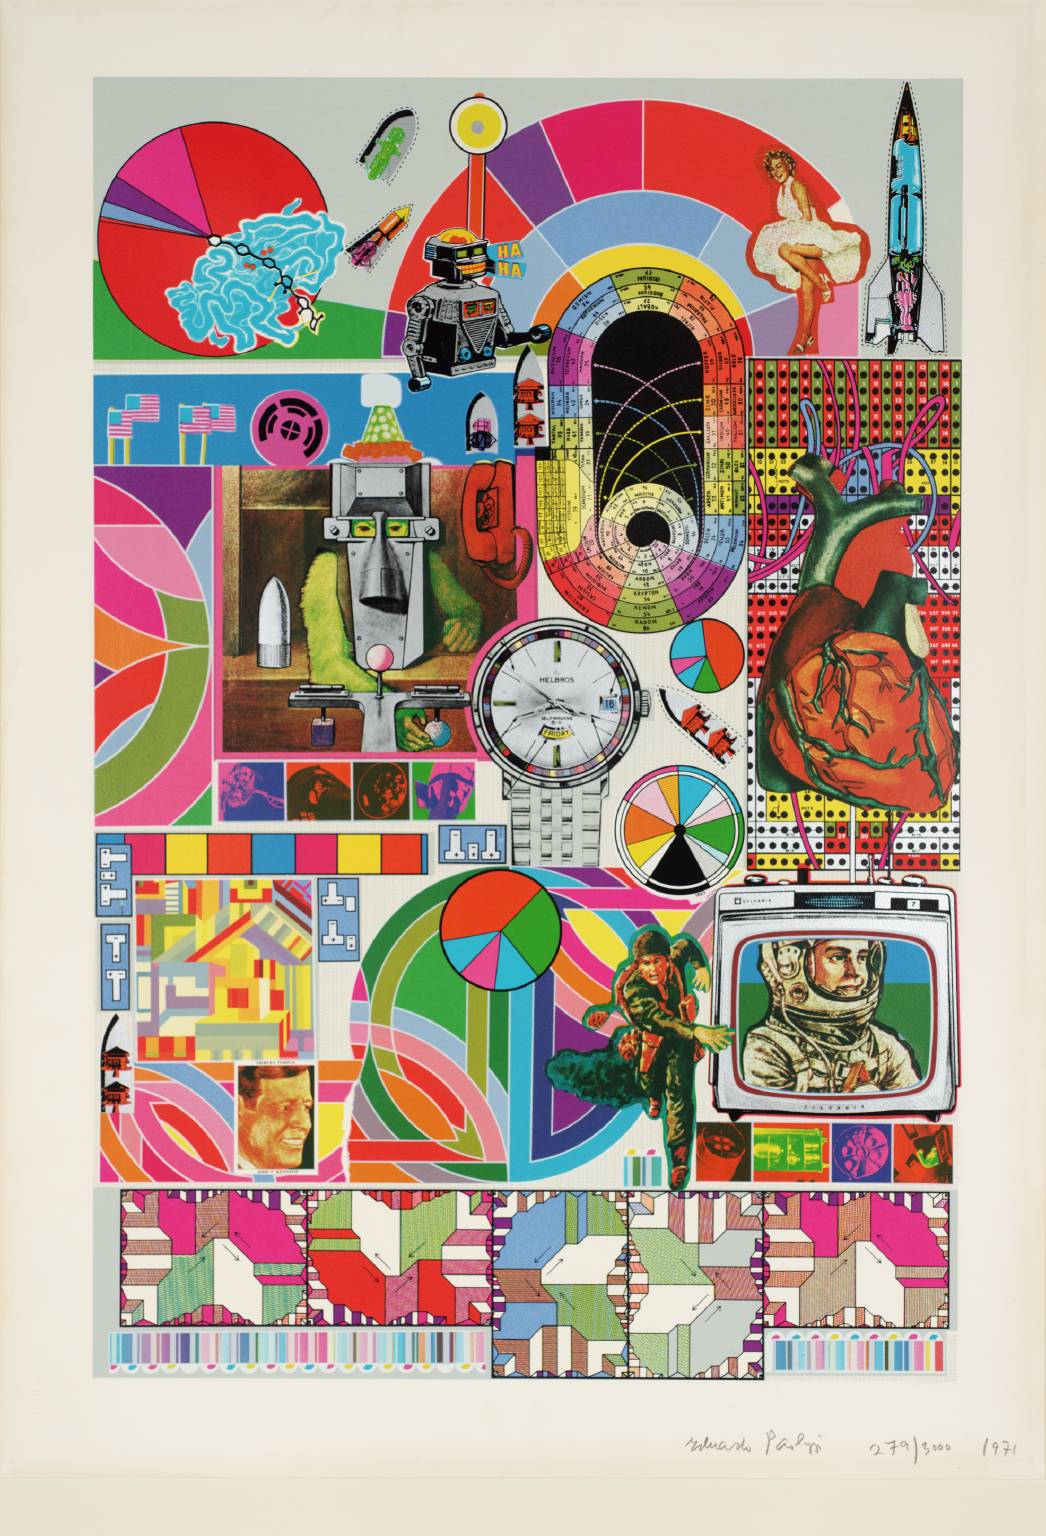 \'BASH\': Print by Eduardo Paolozzi, whose work is currently on view at the Ulster Museum